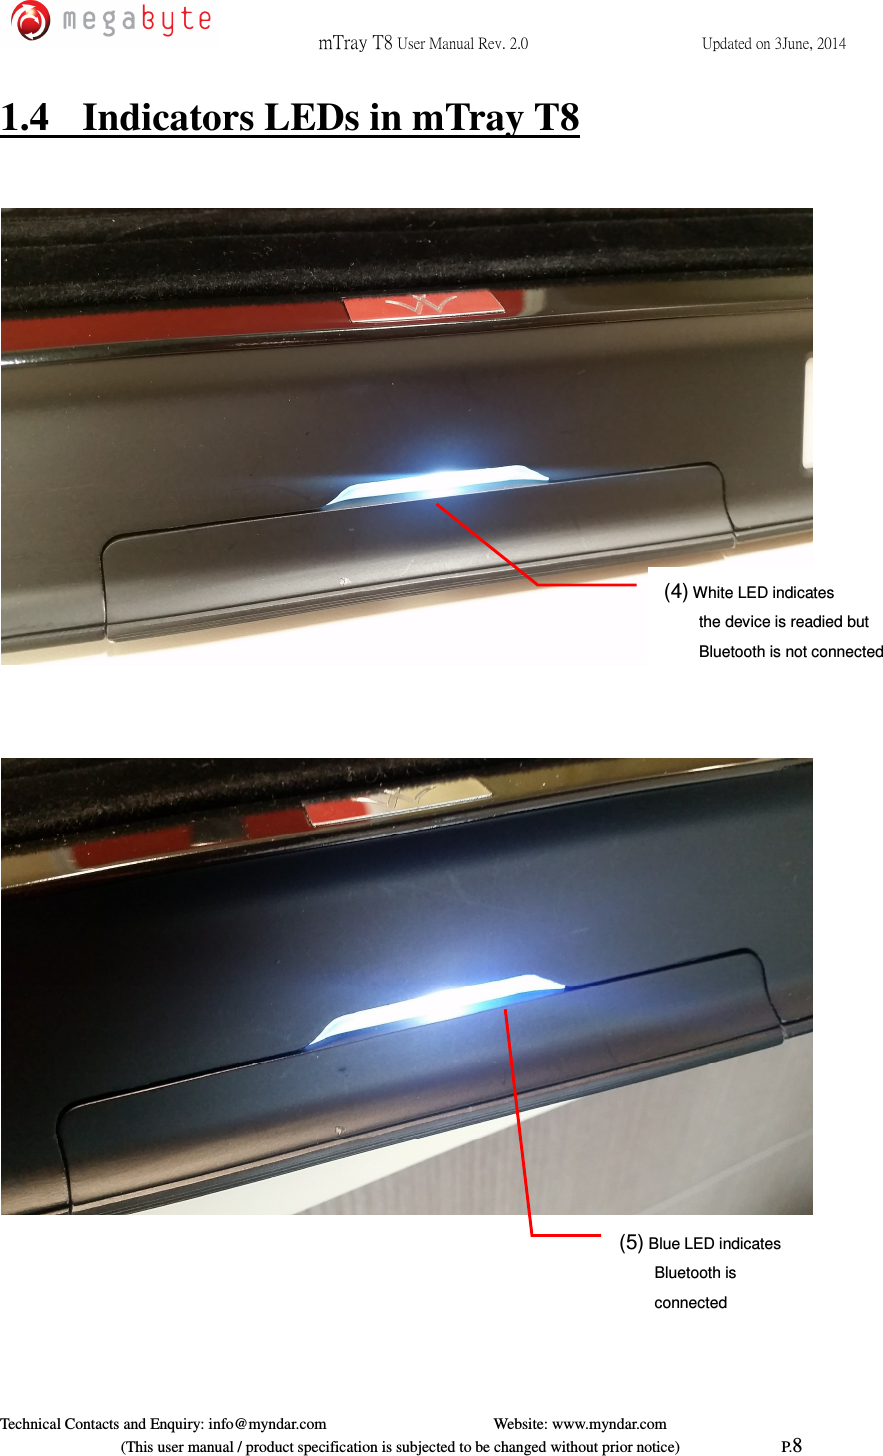  mTray T8 User Manual Rev. 2.0  Updated on 3June, 2014     Technical Contacts and Enquiry: info@myndar.com         Website: www.myndar.com                             (This user manual / product specification is subjected to be changed without prior notice)                          P.8  1.4  Indicators LEDs in mTray T8              (5) Blue LED indicates Bluetooth is connected (4) White LED indicates   the device is readied but Bluetooth is not connected 